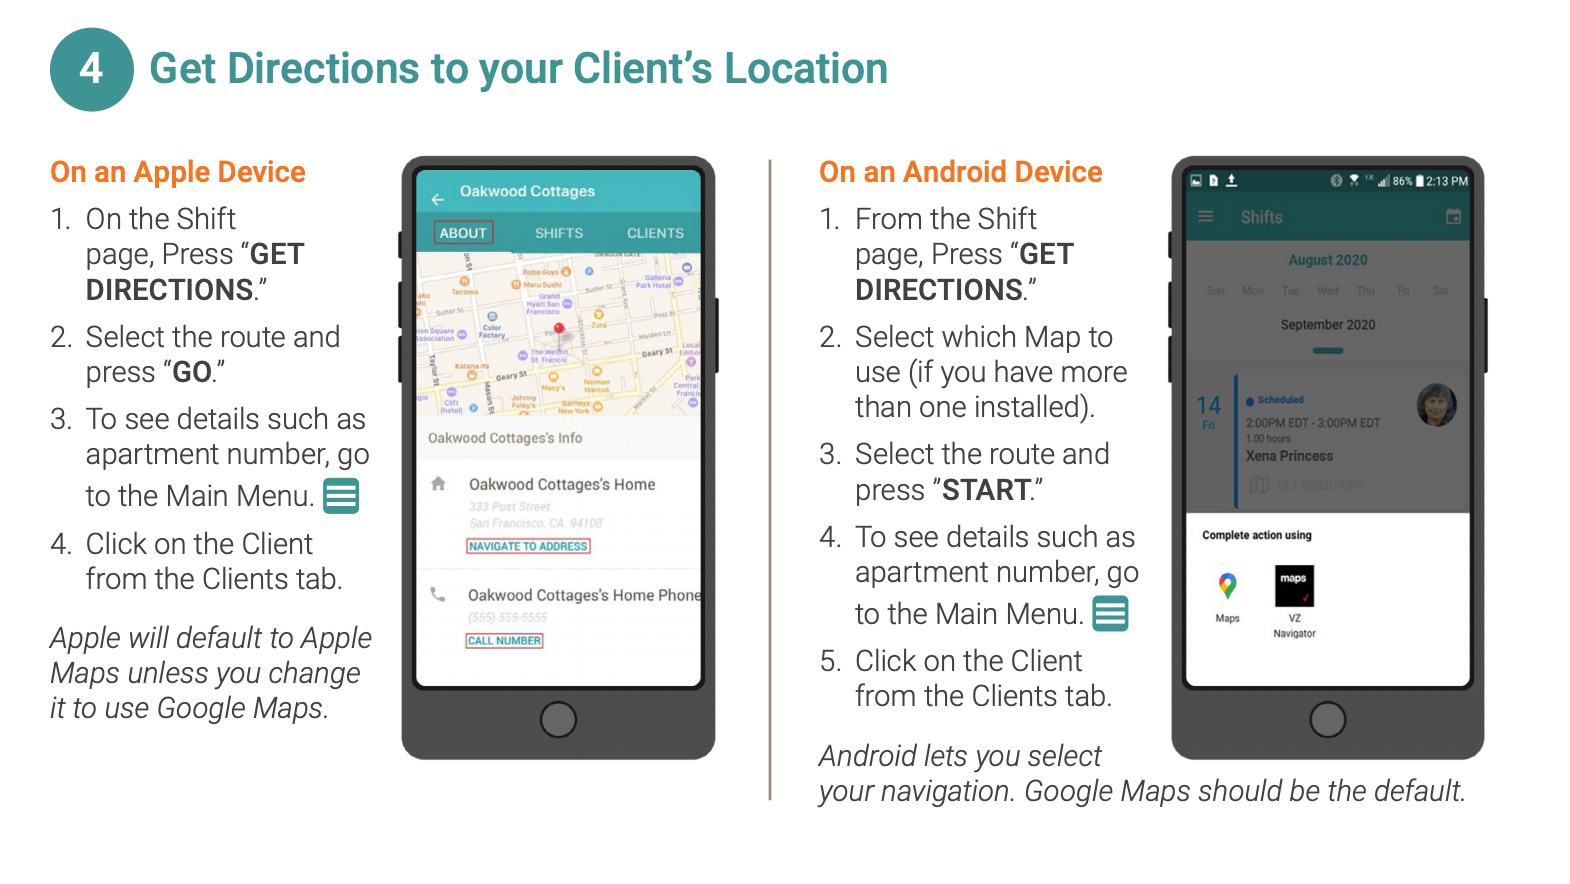 Get Directions to your Clients Location